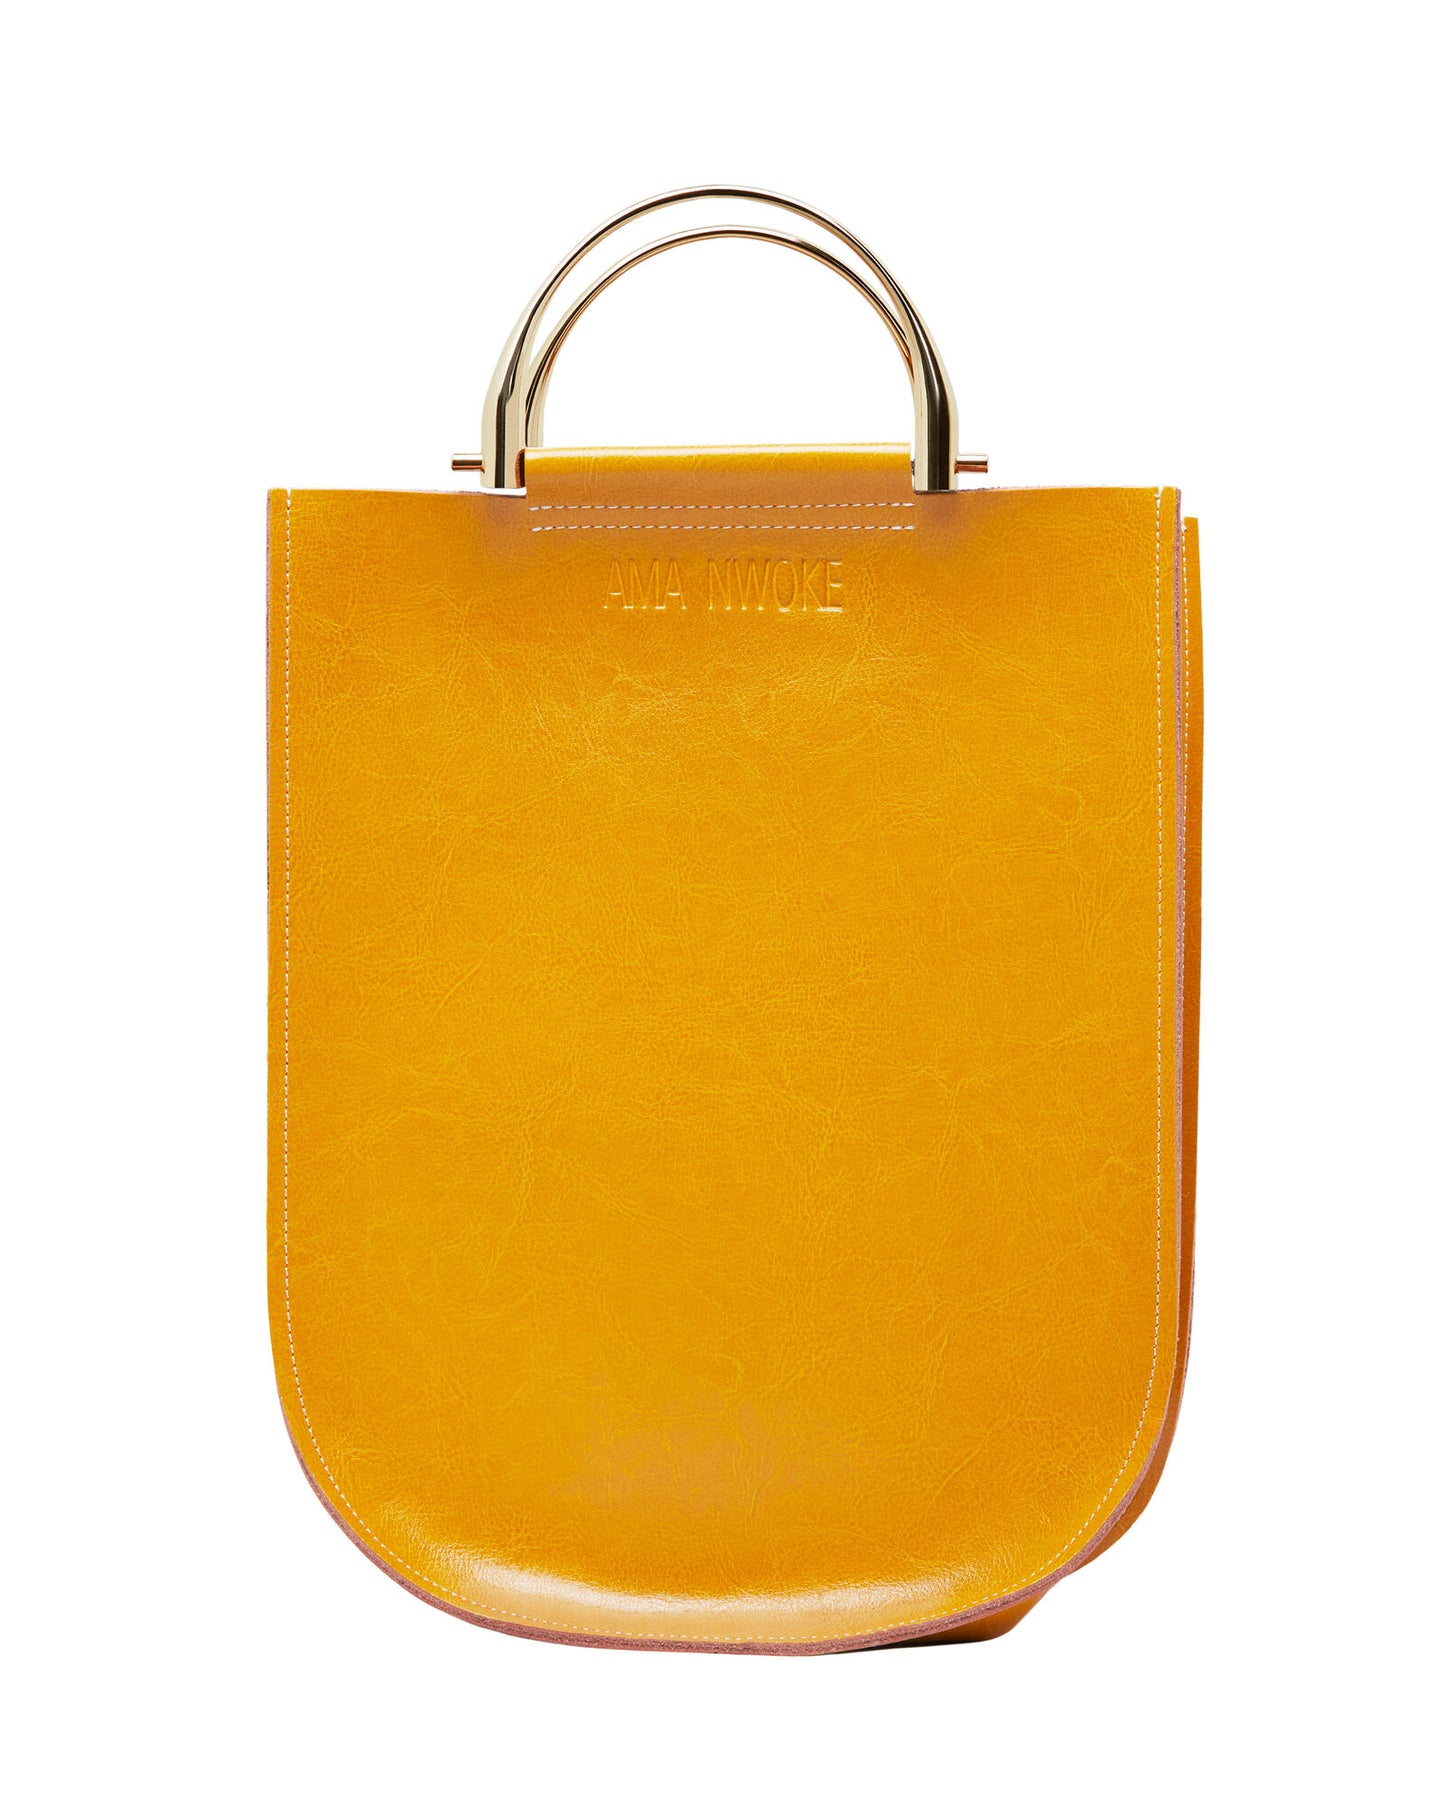 Gold Handle-Soft Leather Tote